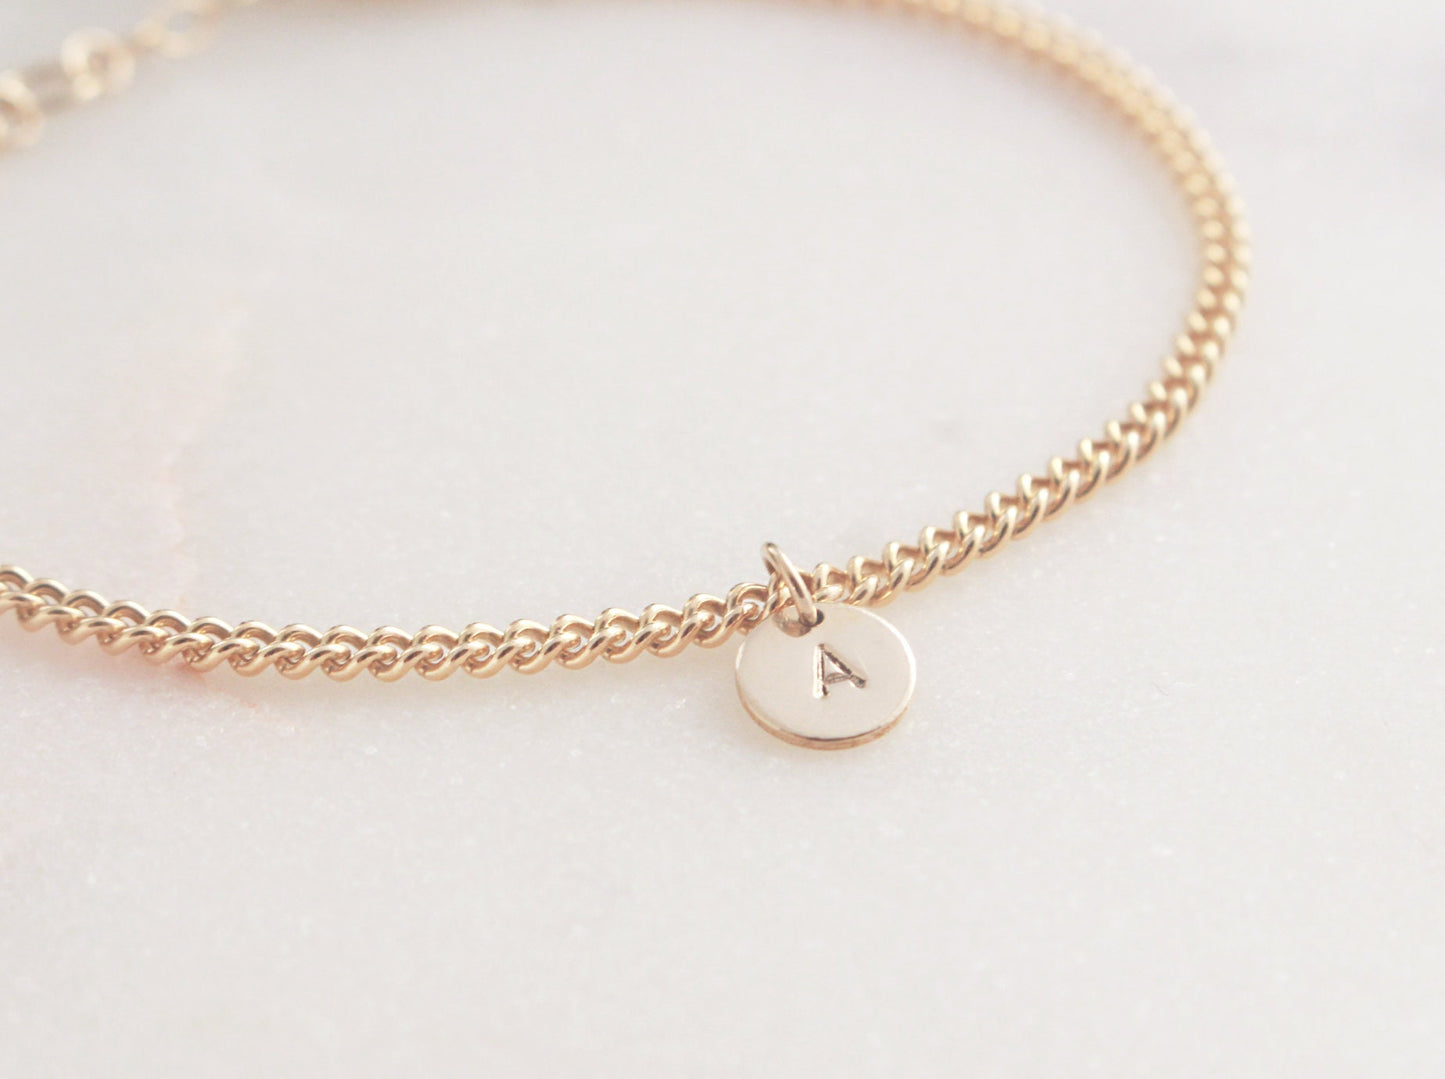 Initial Charm Bracelet - Gold Curb Chain (Normal) - 14k Gold Filled 2.5mm Curb Chain, 6.4mm Round Initial Charm